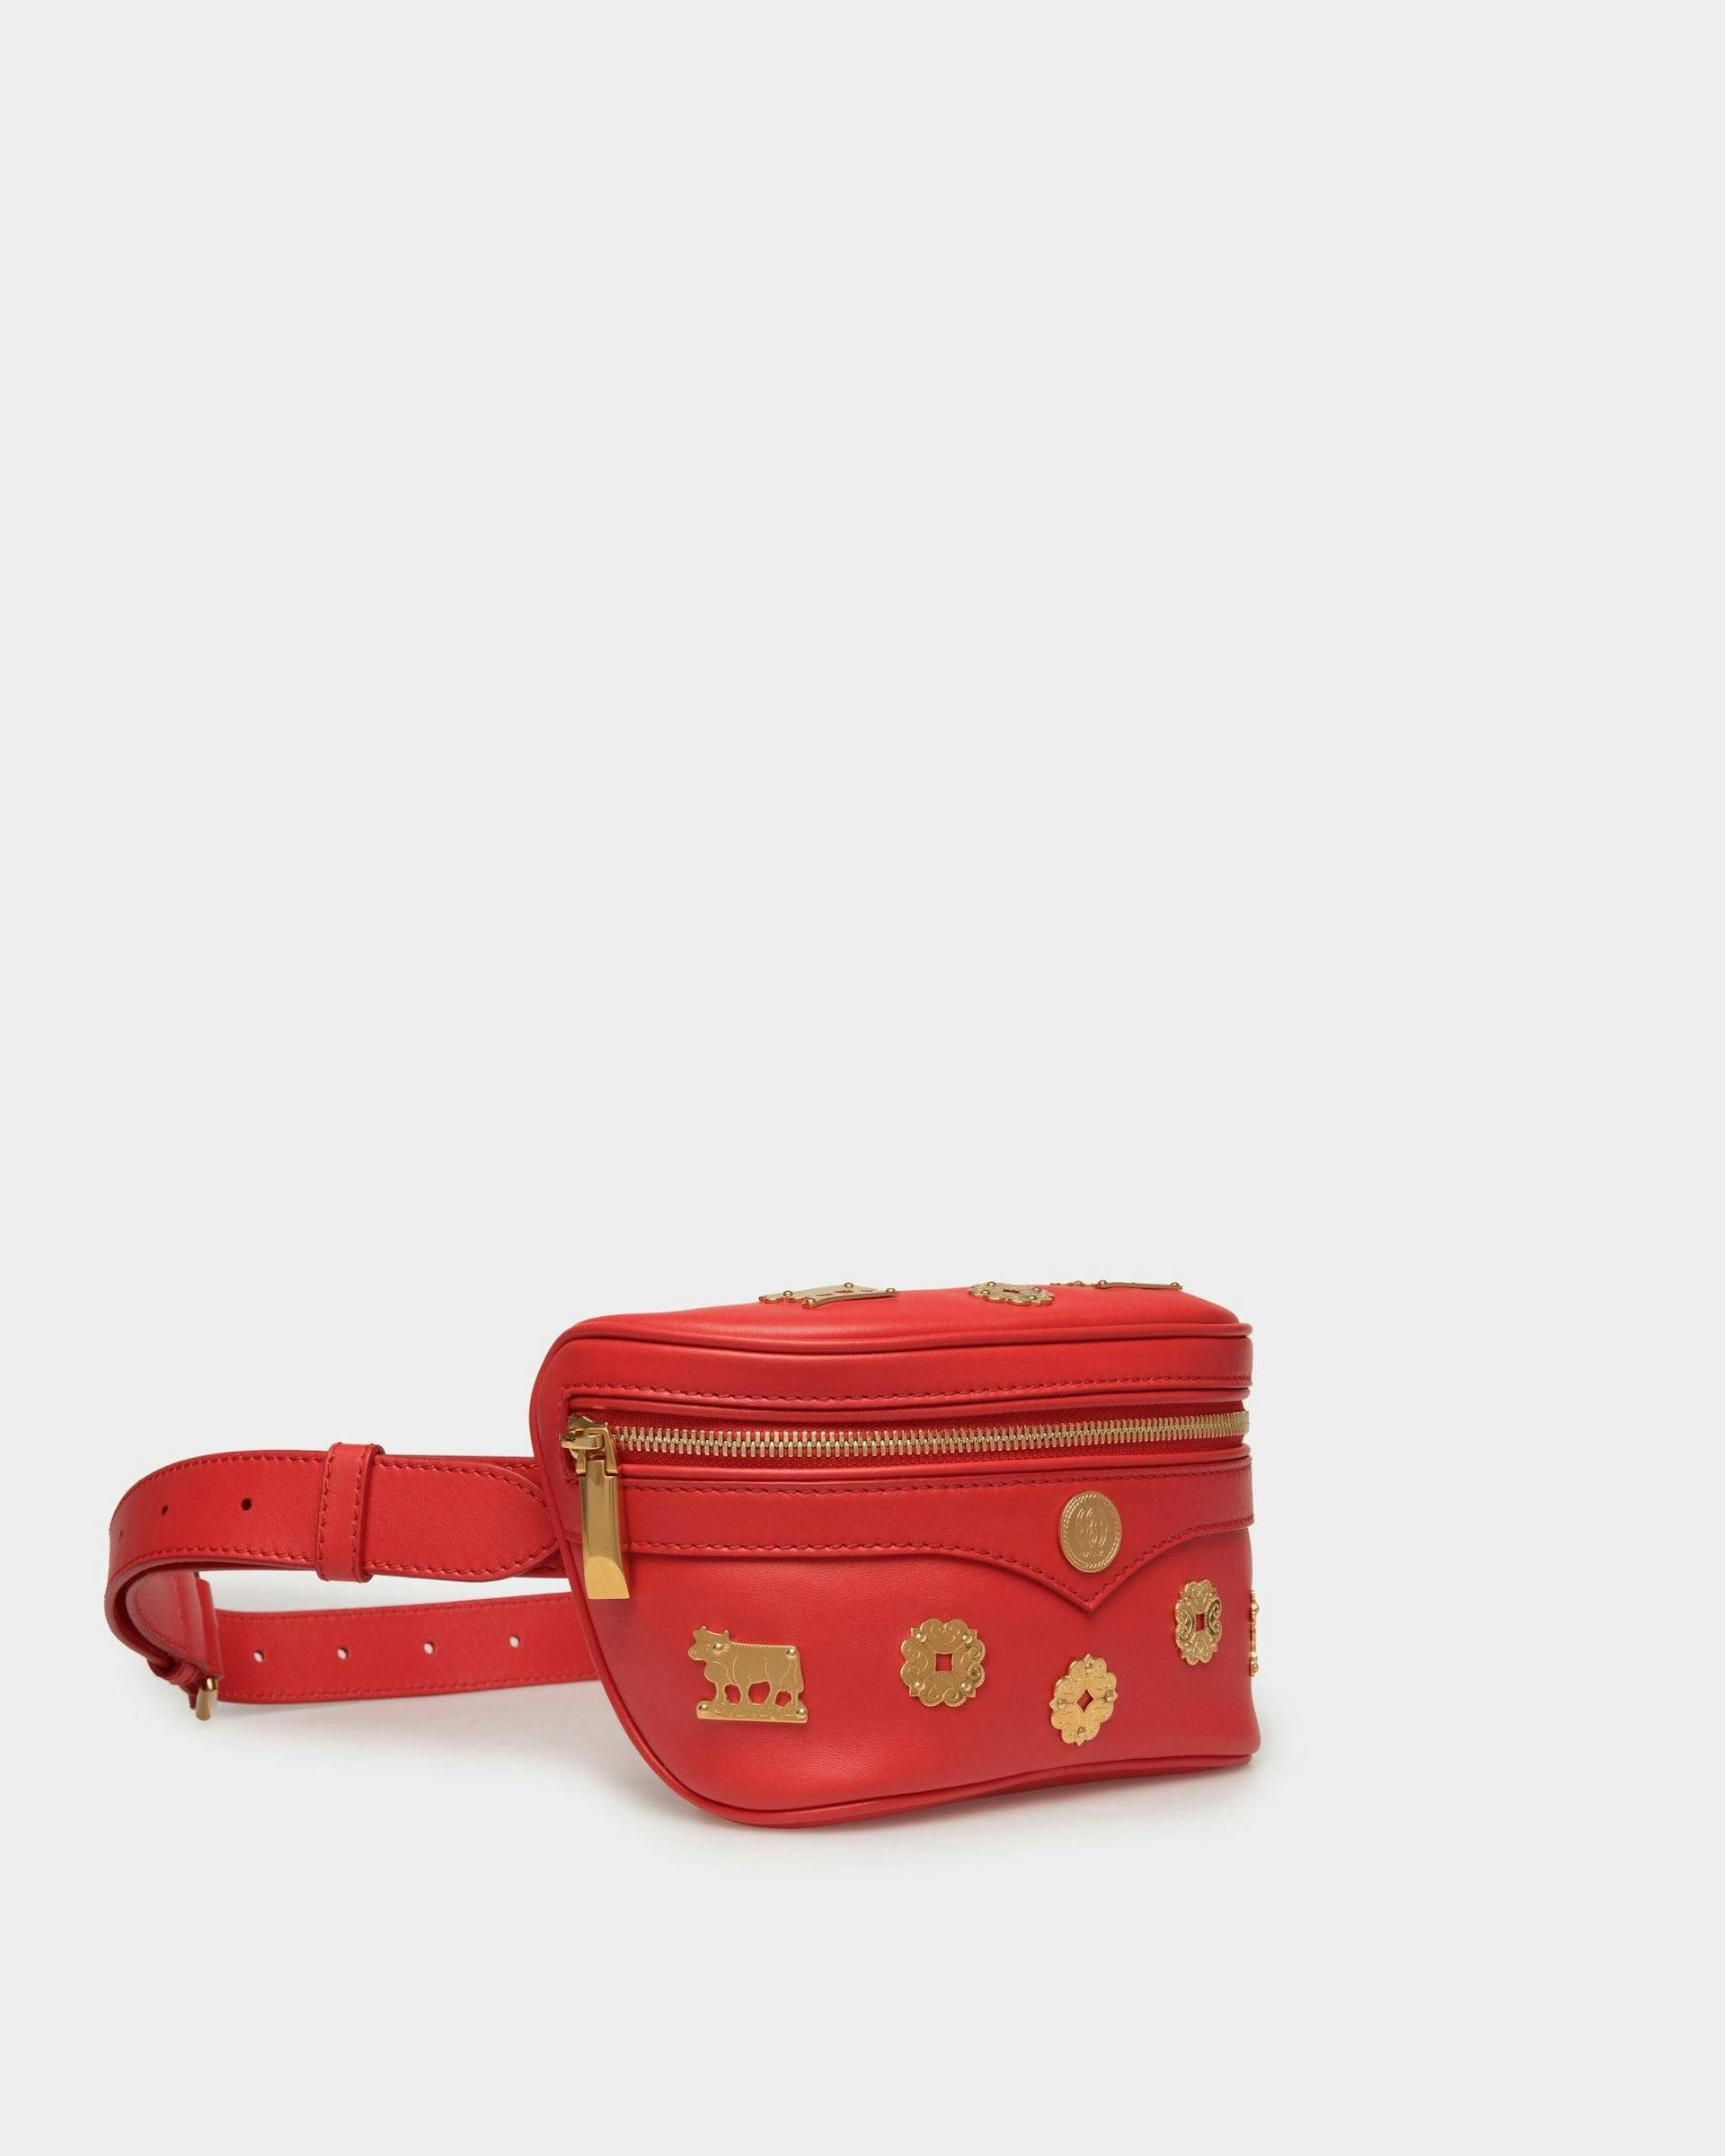 Women's Moutain Belt Bag  in Red Leather | Bally | Still Life 3/4 Front